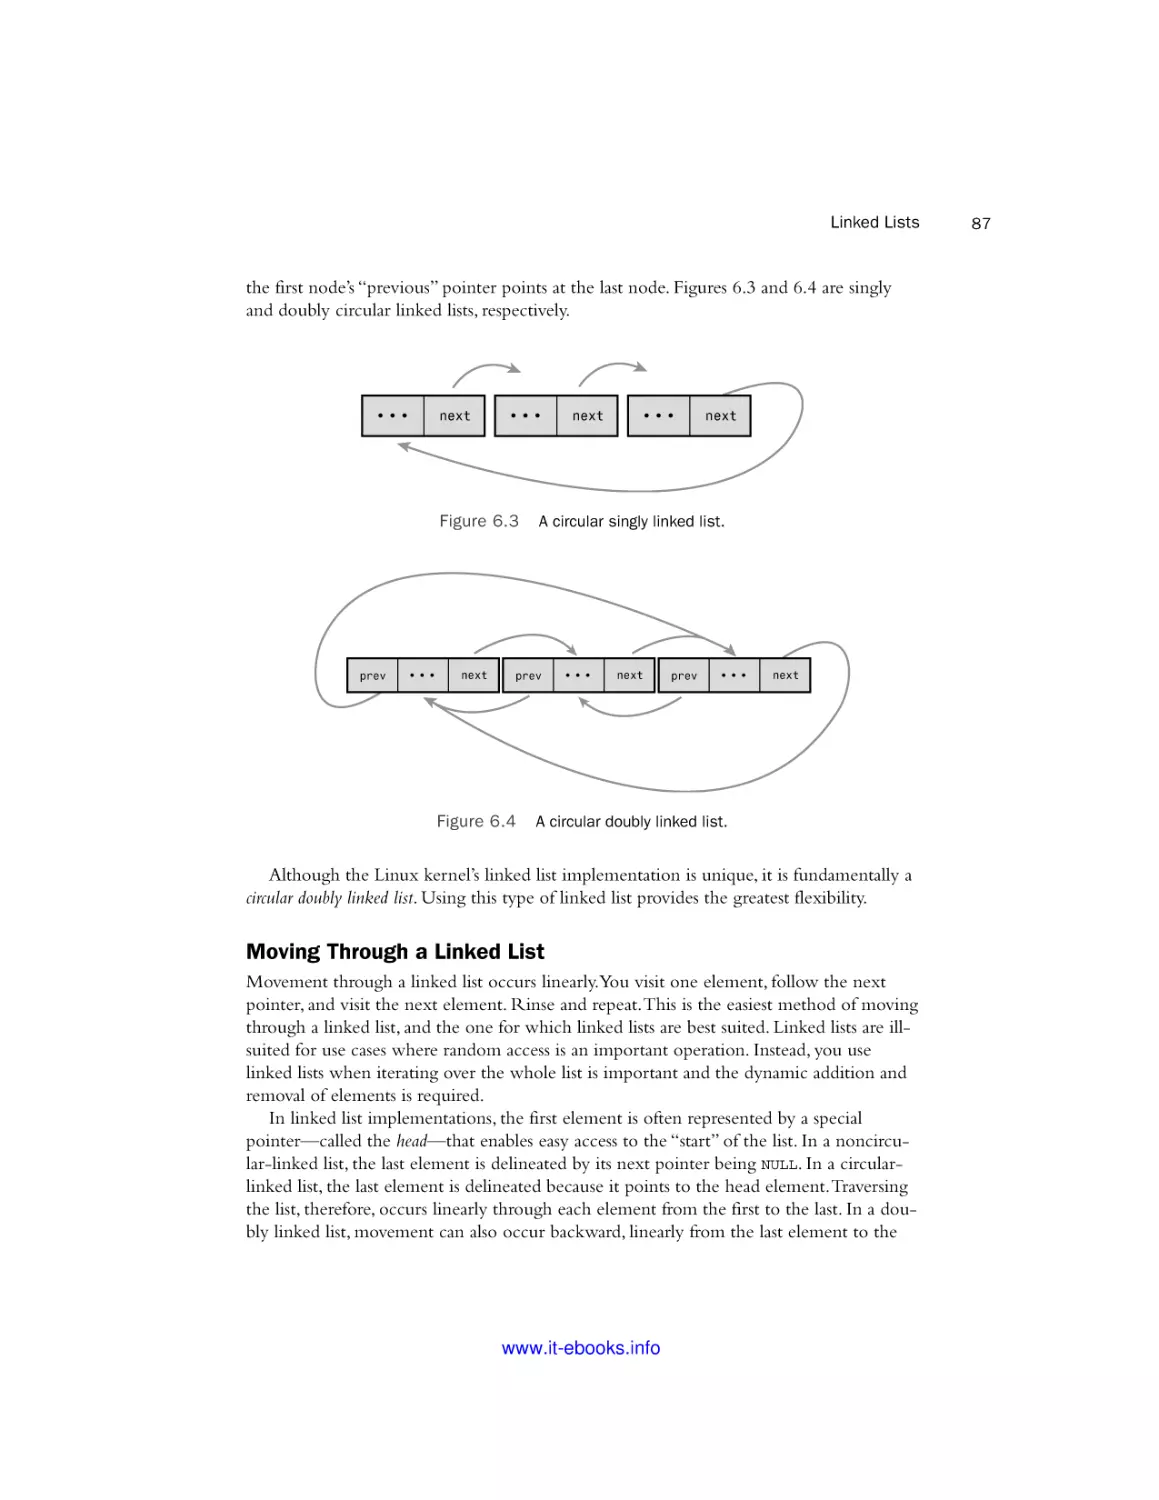 Moving Through a Linked List